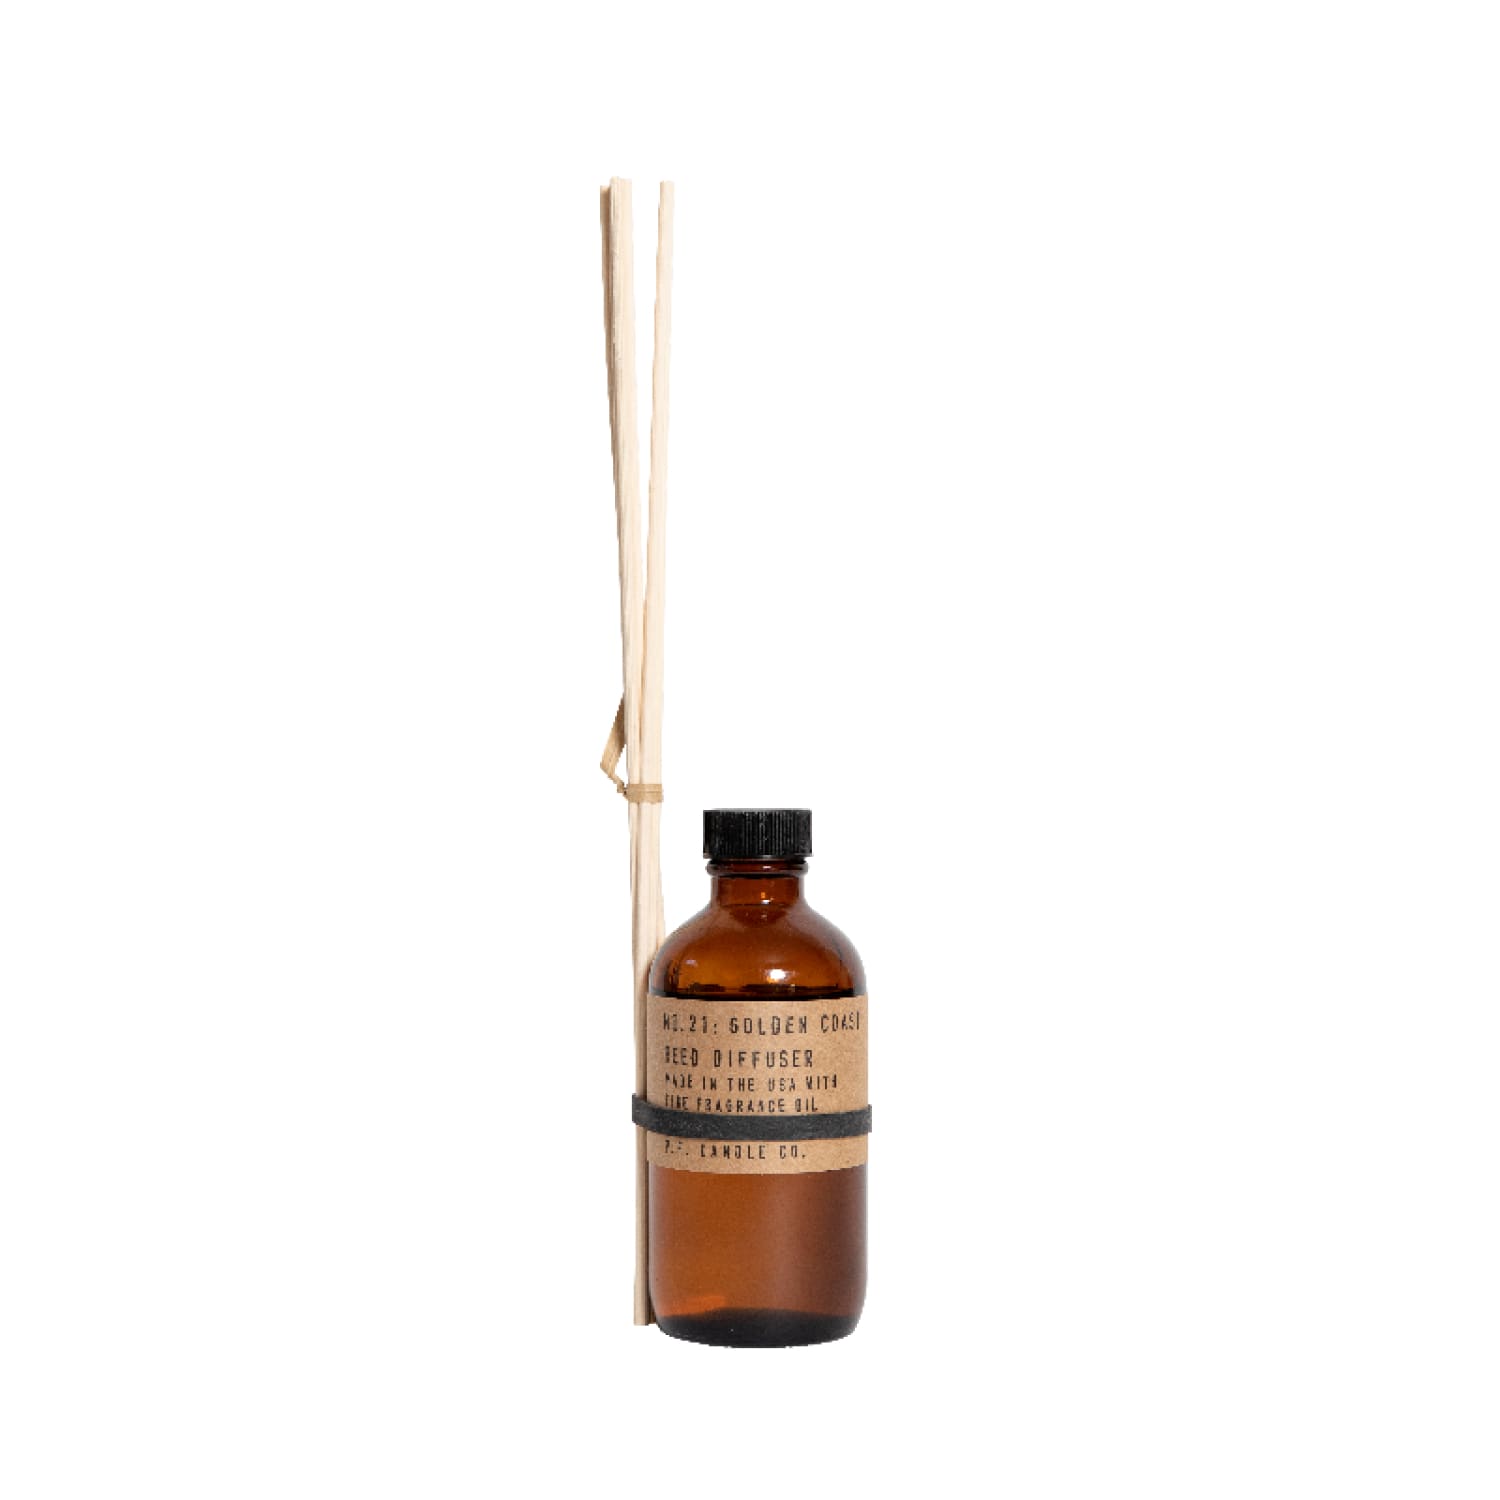 P.f. Candle Co. Reed Diffuser - Golden Coast Candles - 